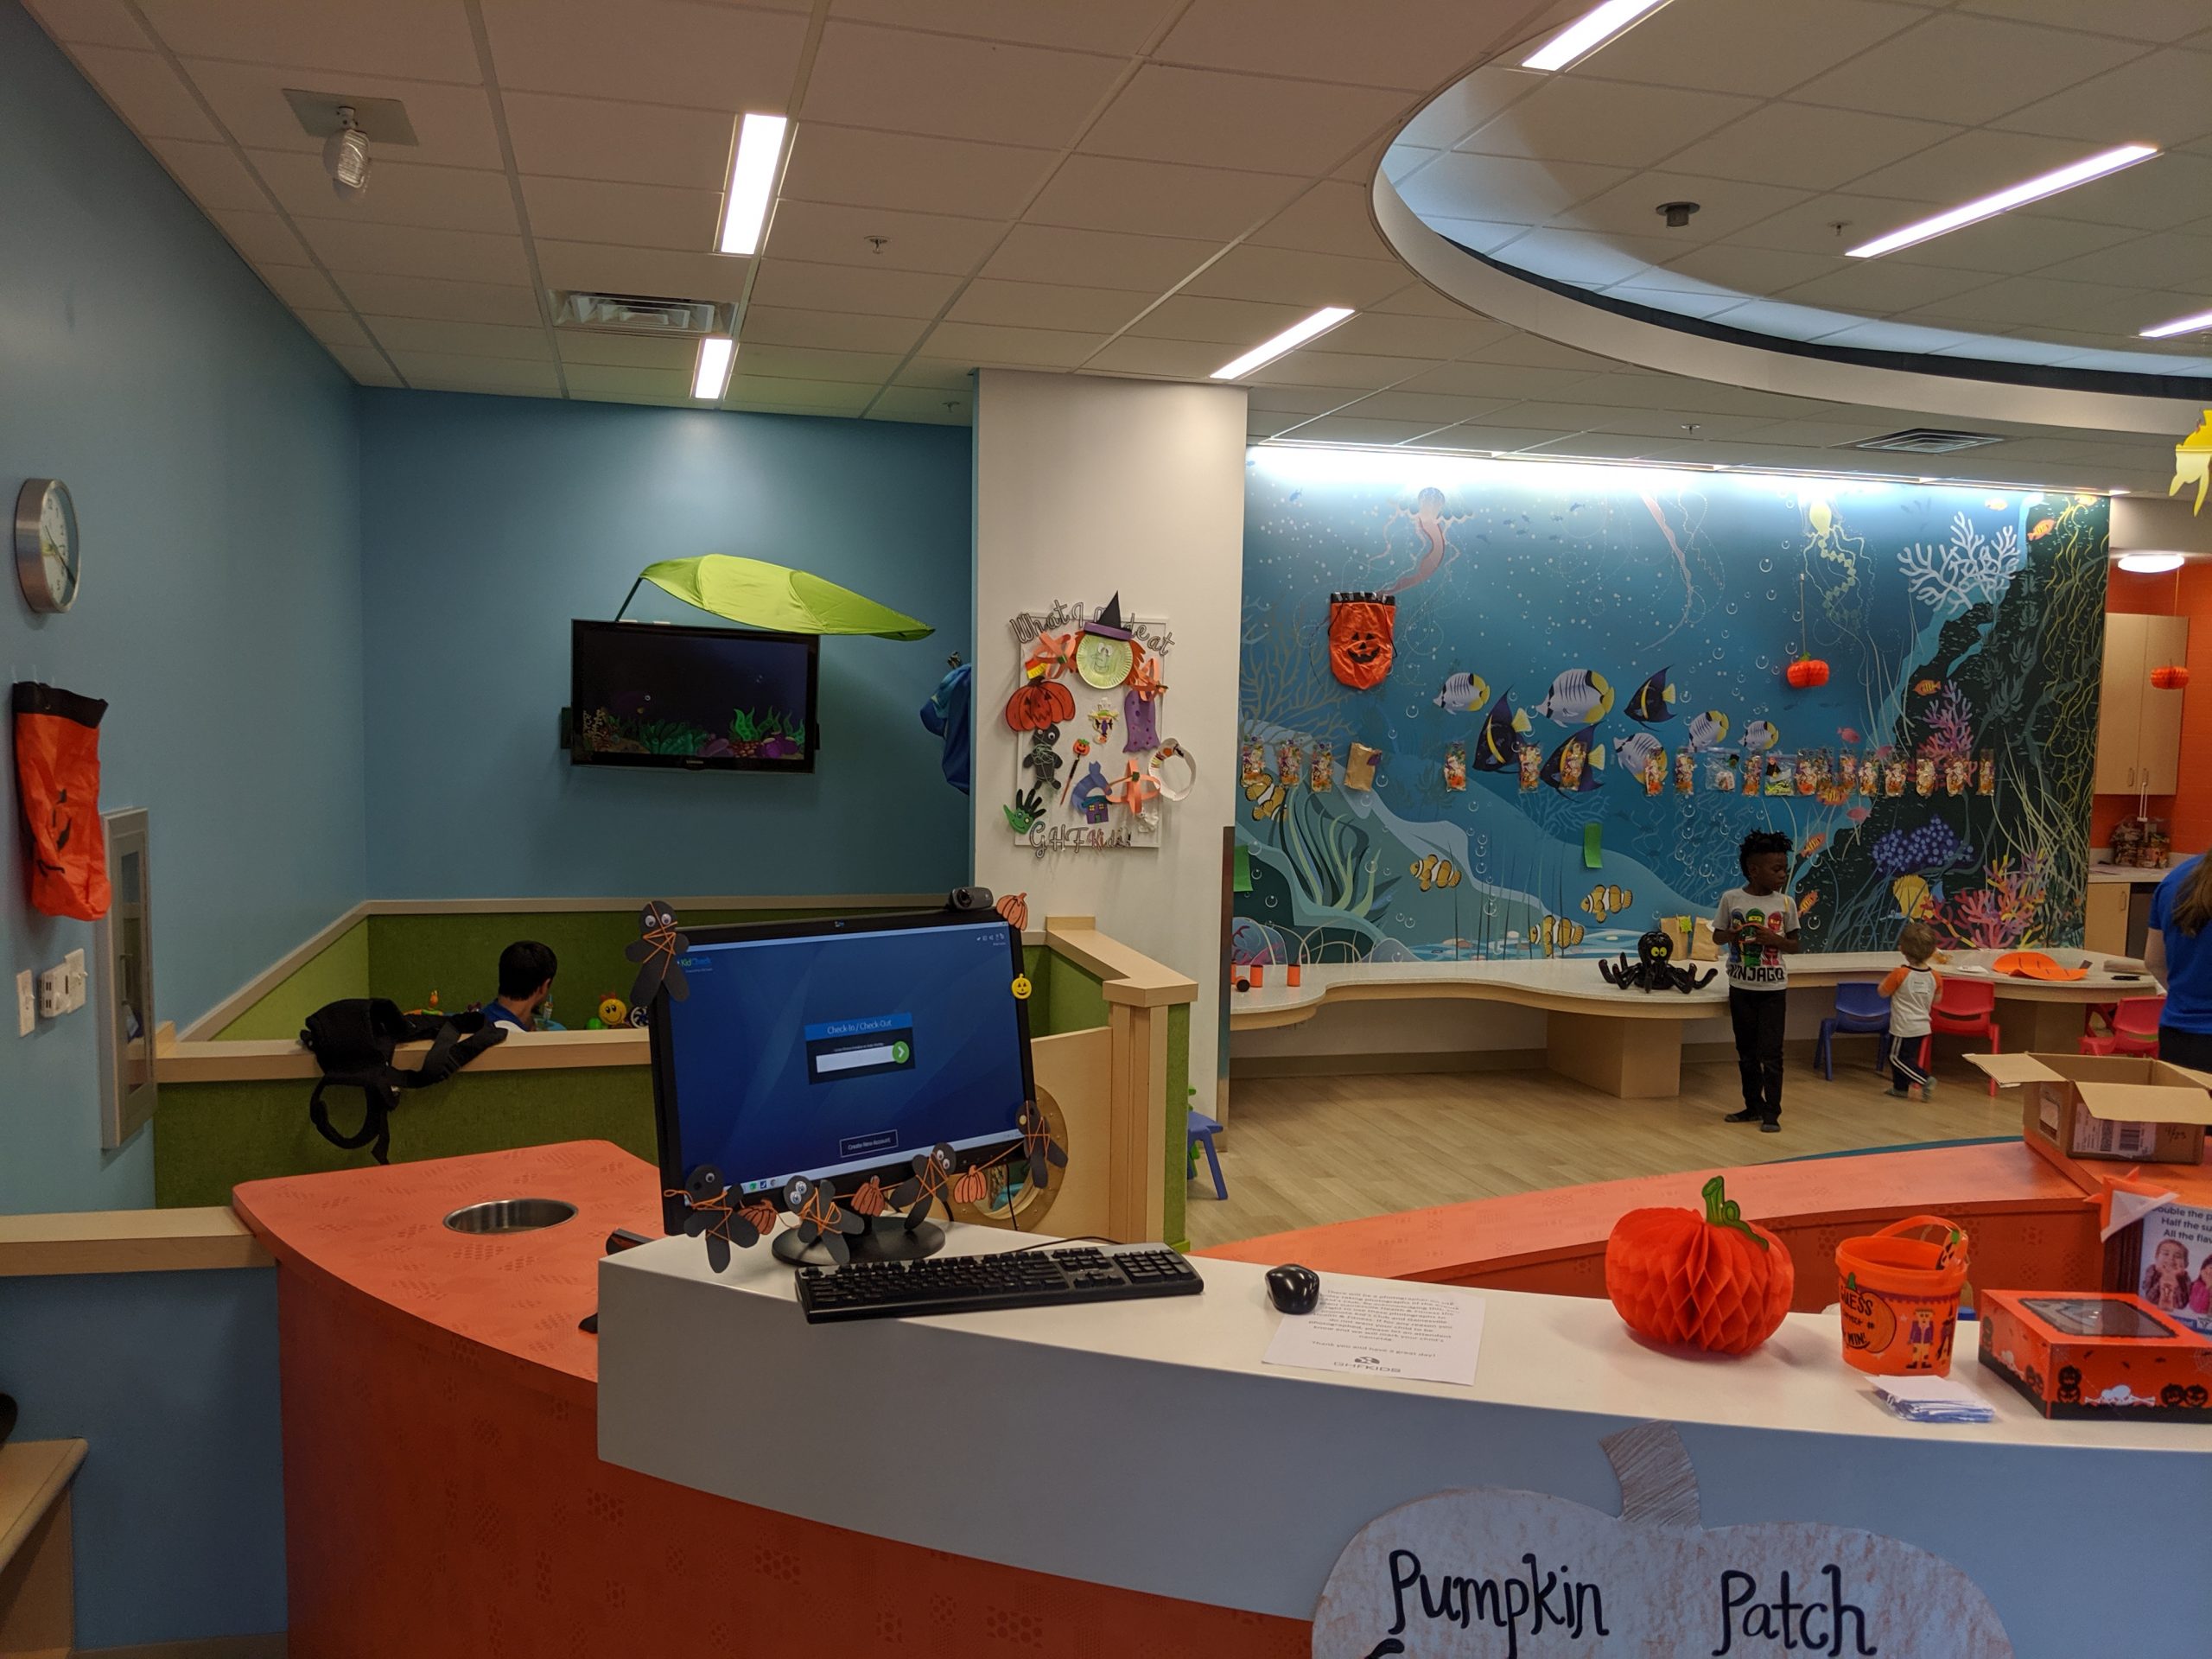 KidCheck Secure Children's Check-In Shares Solution Story from Gainesville Health and Fitness Kids Club